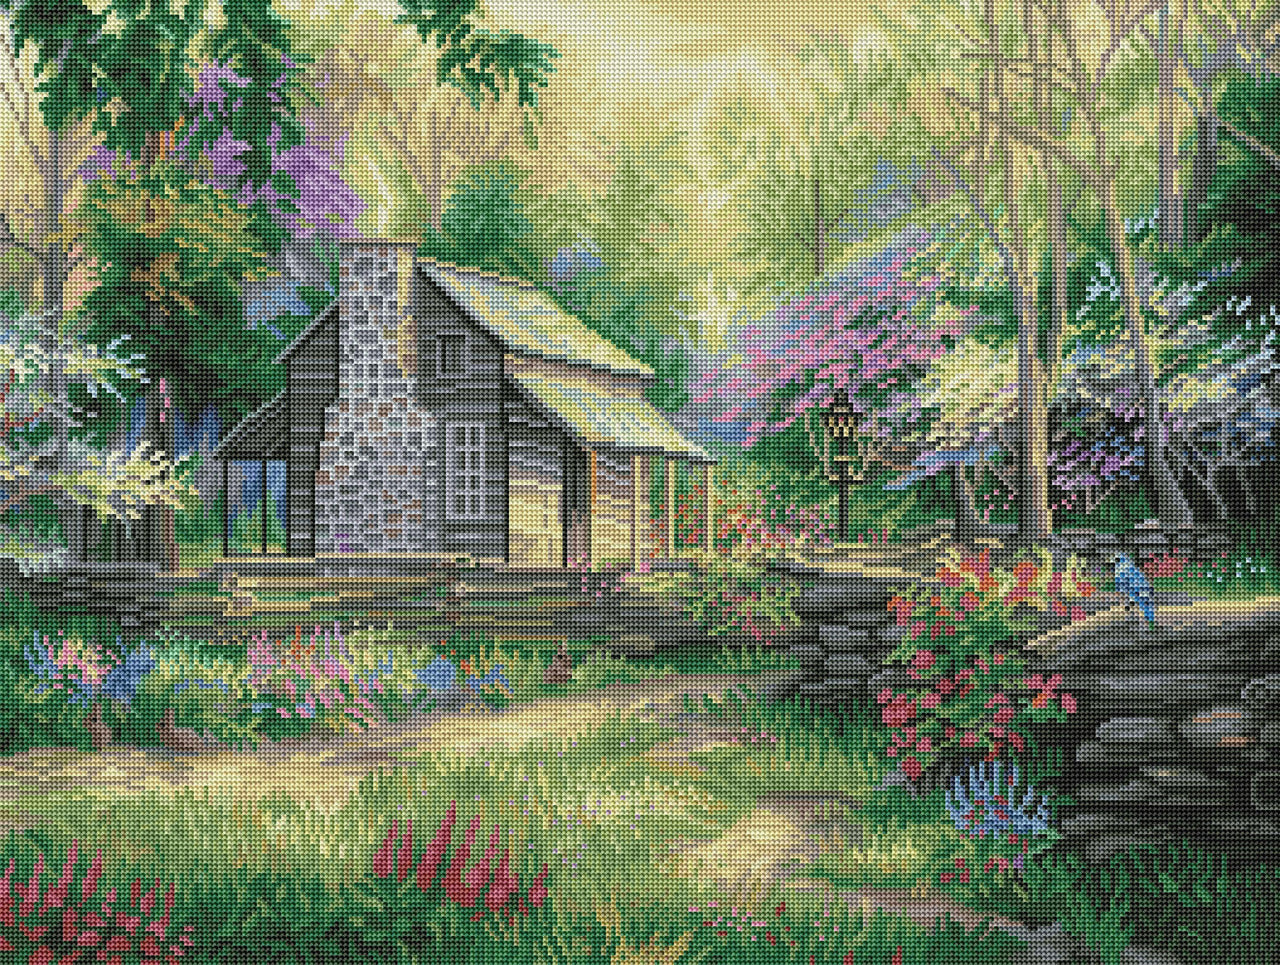 Diamond Painting Woodland Oasis 29" x 22" (74cm x 56cm) / Round With 59 Colors Including 3 ABs / 52,536